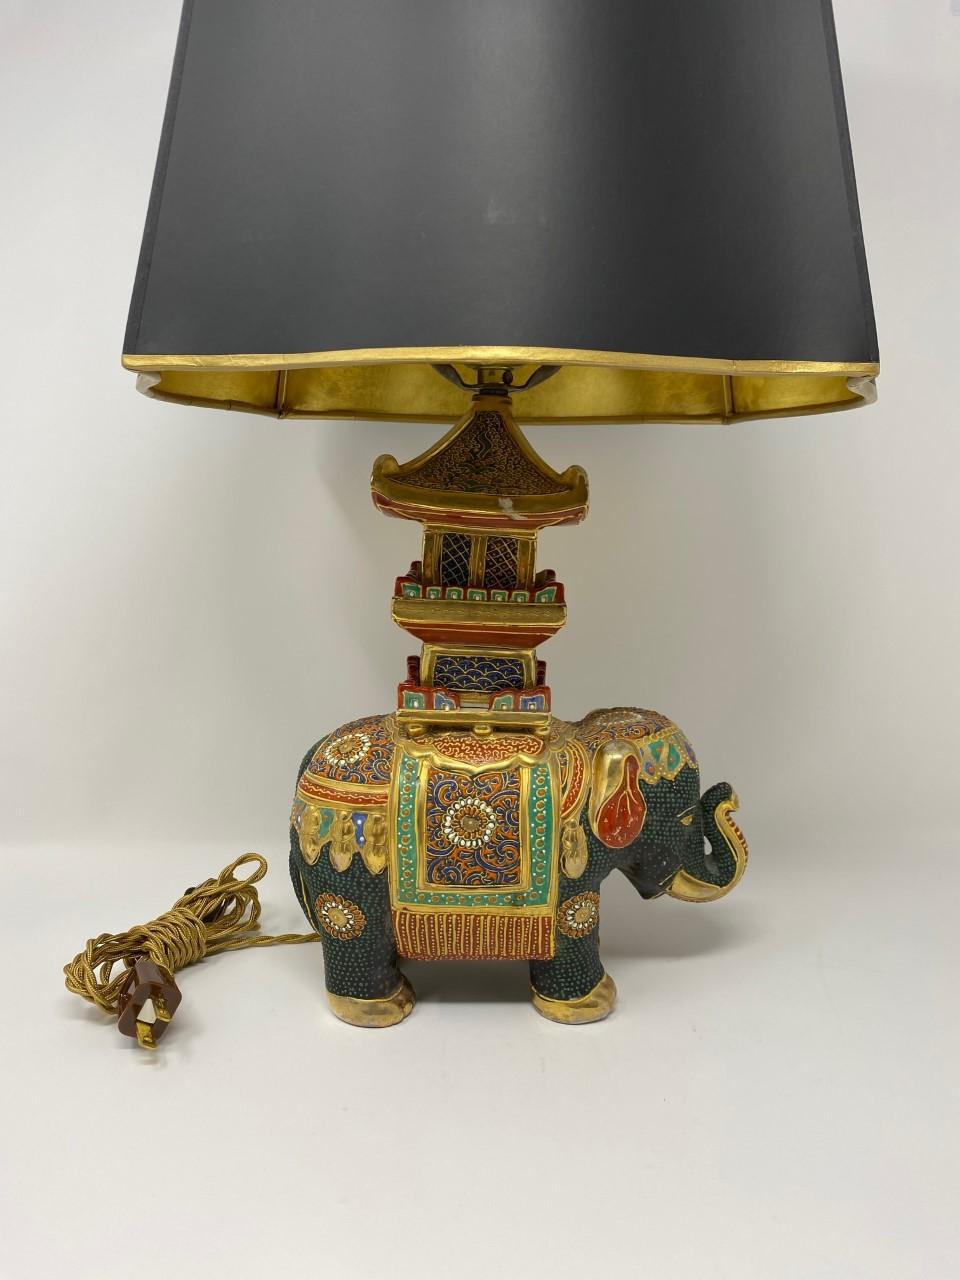 Beautiful and striking Chinoiserie piece. Just like the symbolic meaning of elephants (Strenght, Protection and Wisdom) this piece will enhance your style. This vintage table lamp is of Japanese origin and dates from the early 1940s. The ceramic